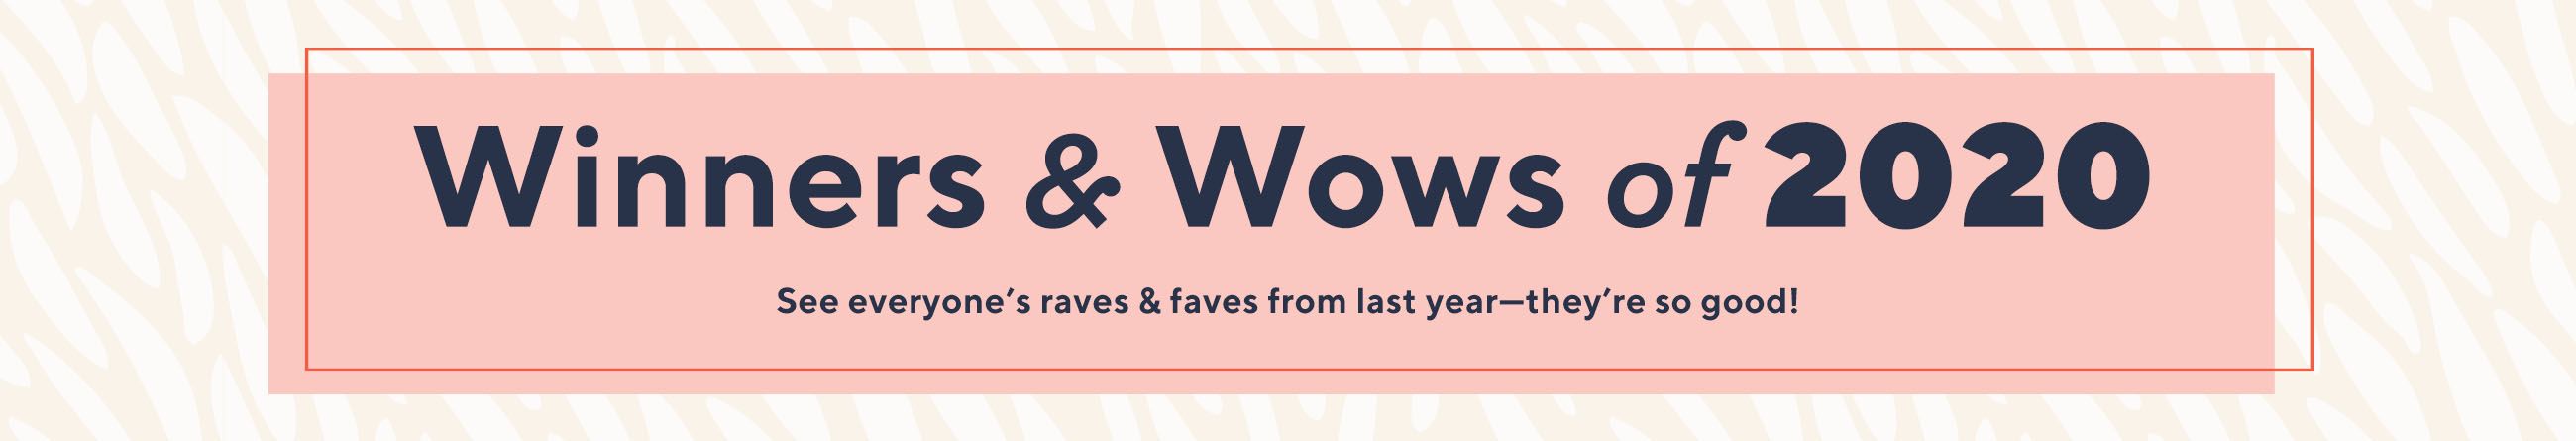 Winners & Wows of 2020. See everyone’s raves & faves from last year—they're so good!